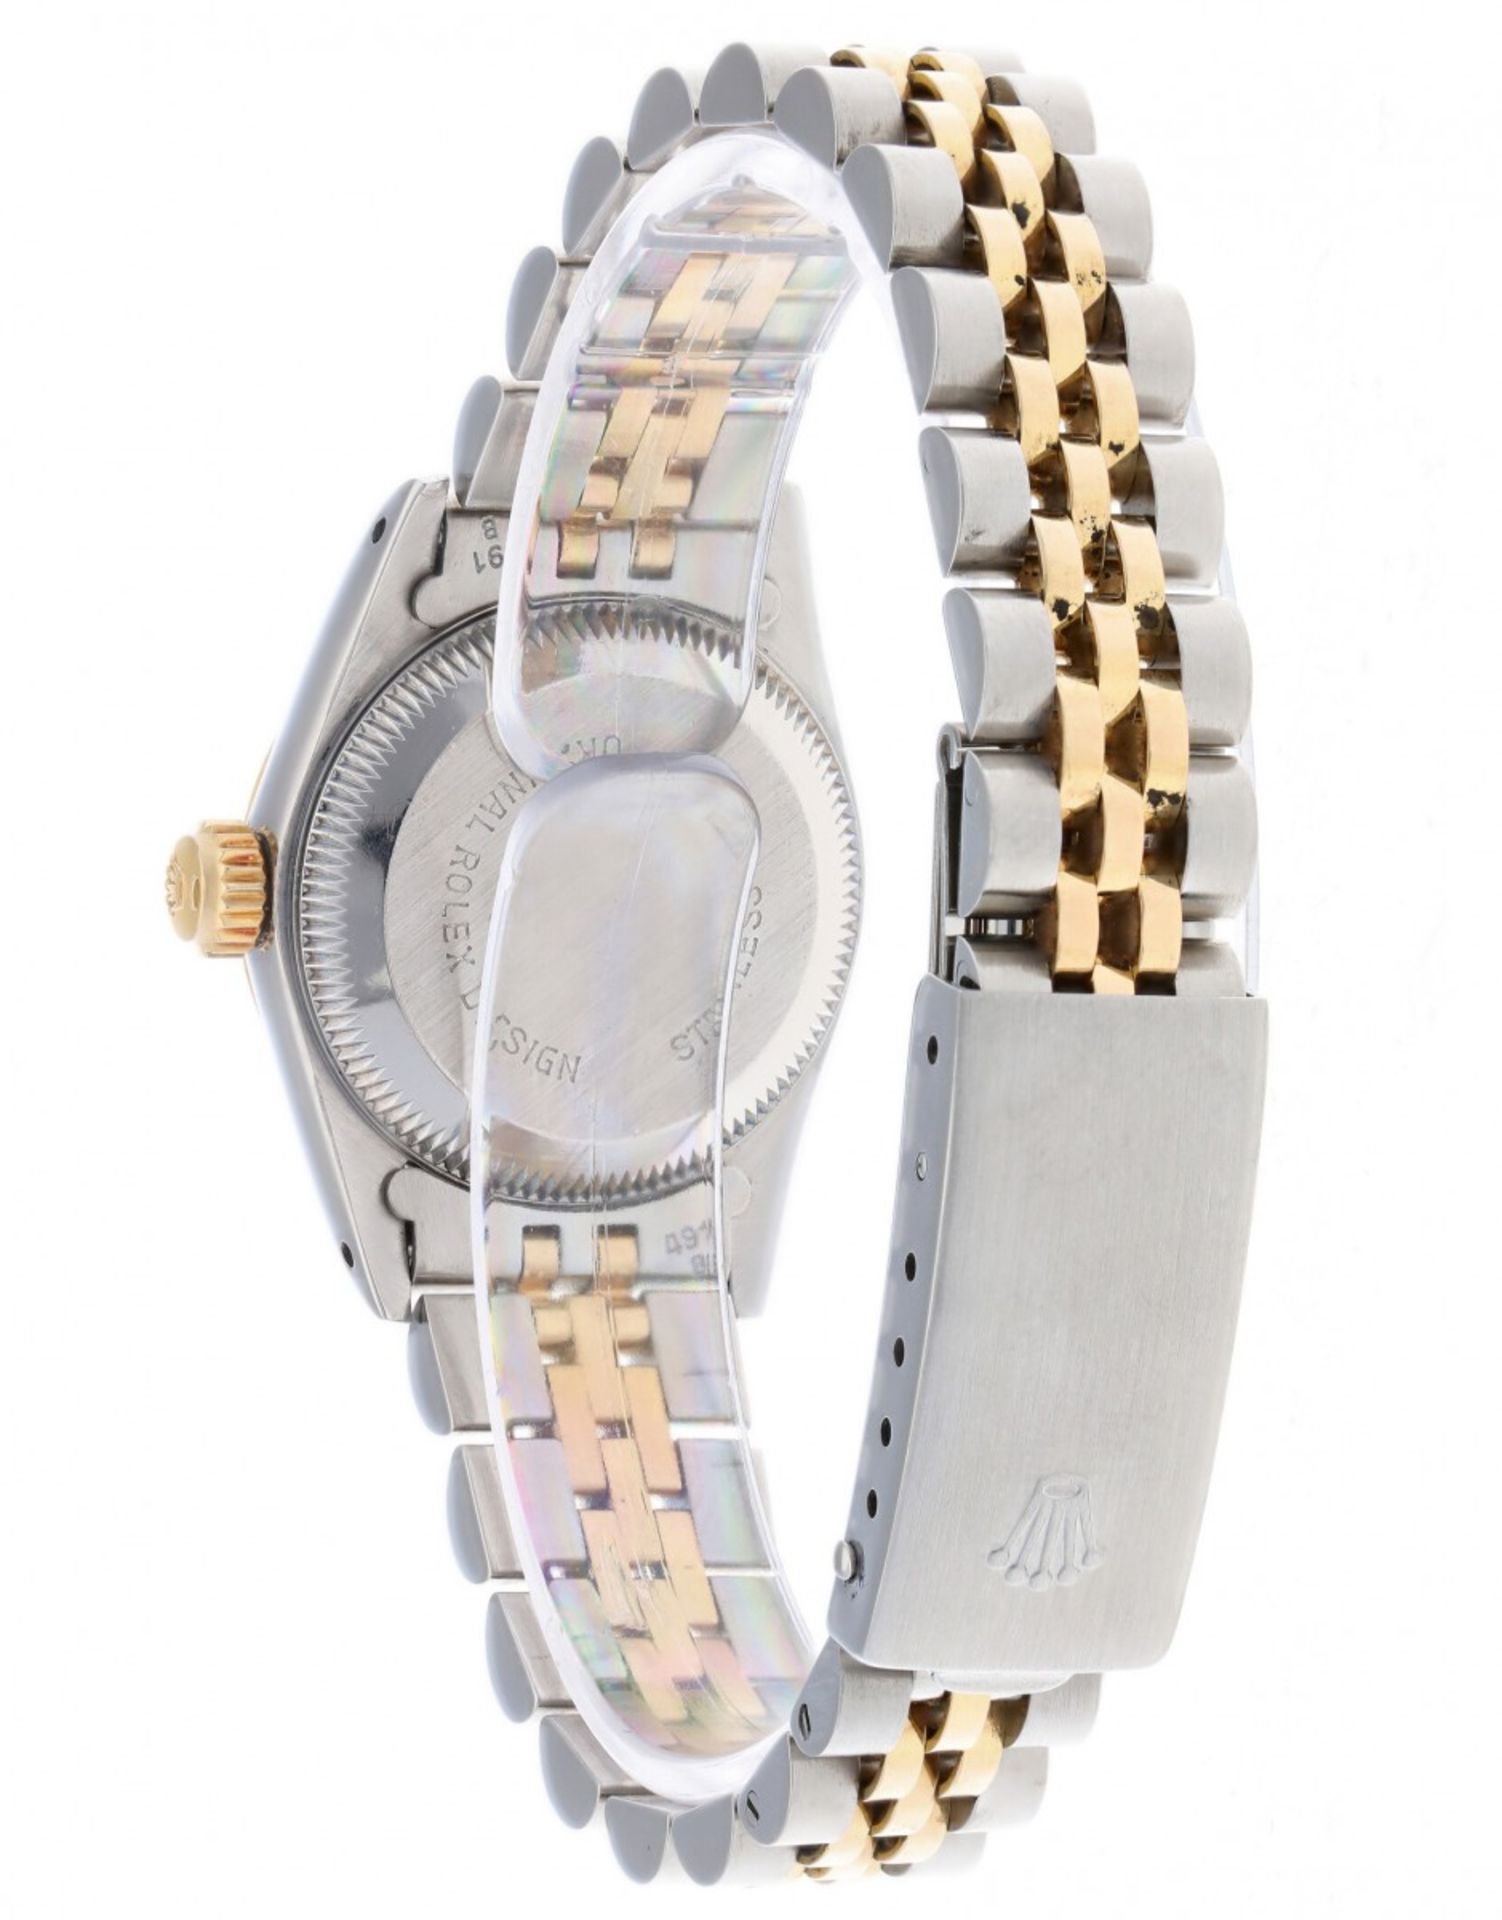 Rolex Oyster Perpetual 67193 - Ladies watch - ca. 1987 - Image 3 of 5